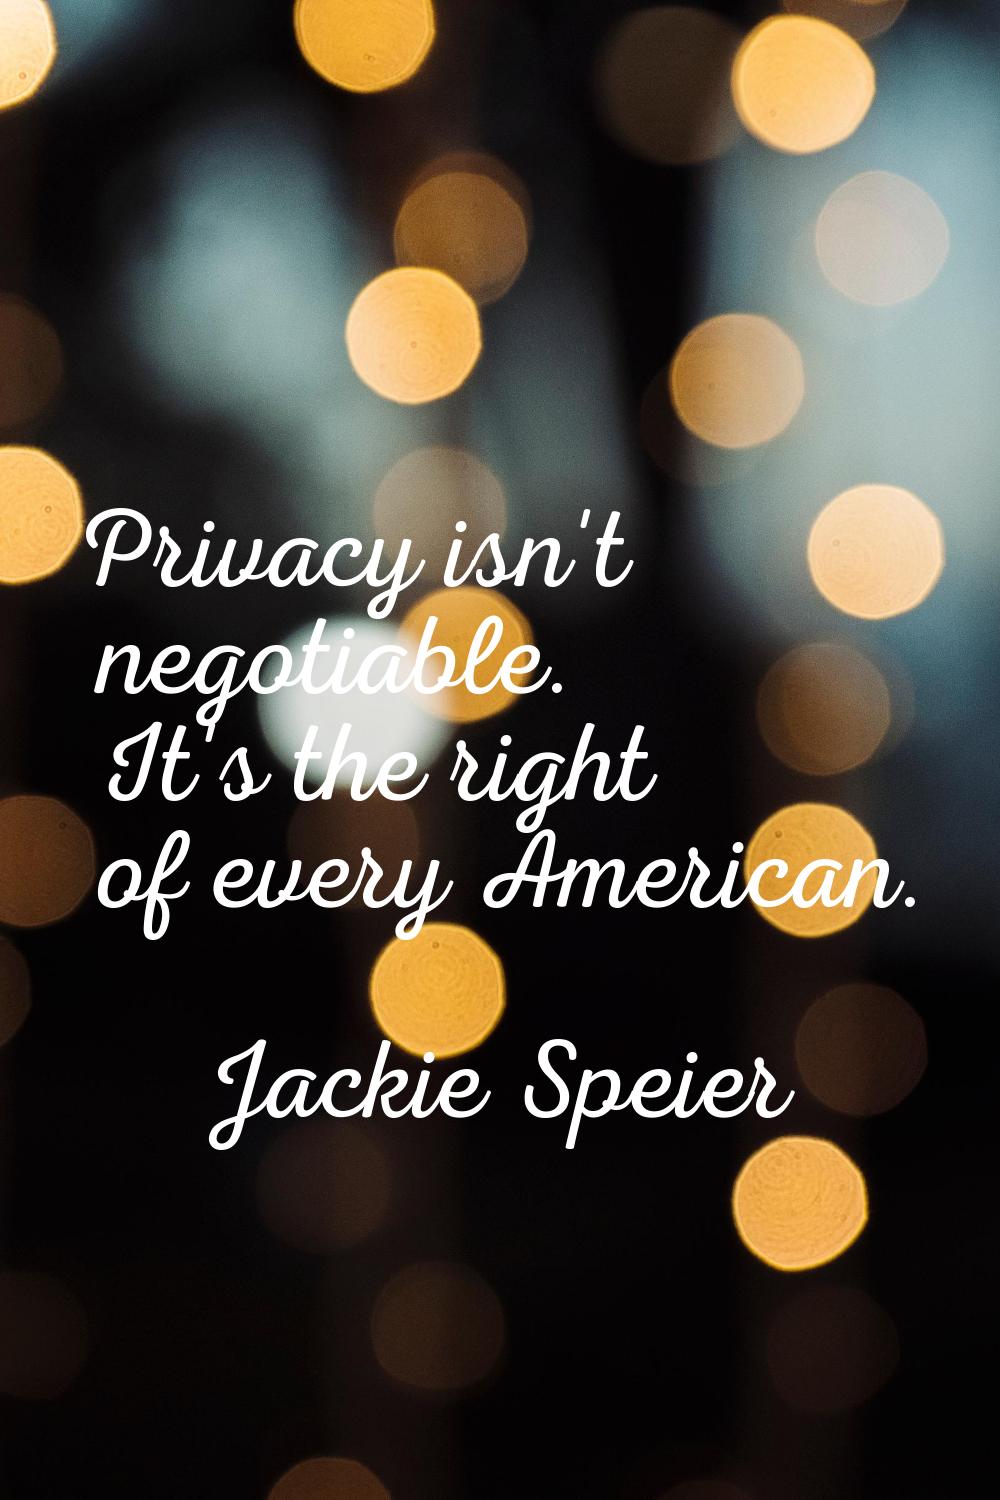 Privacy isn't negotiable. It's the right of every American.